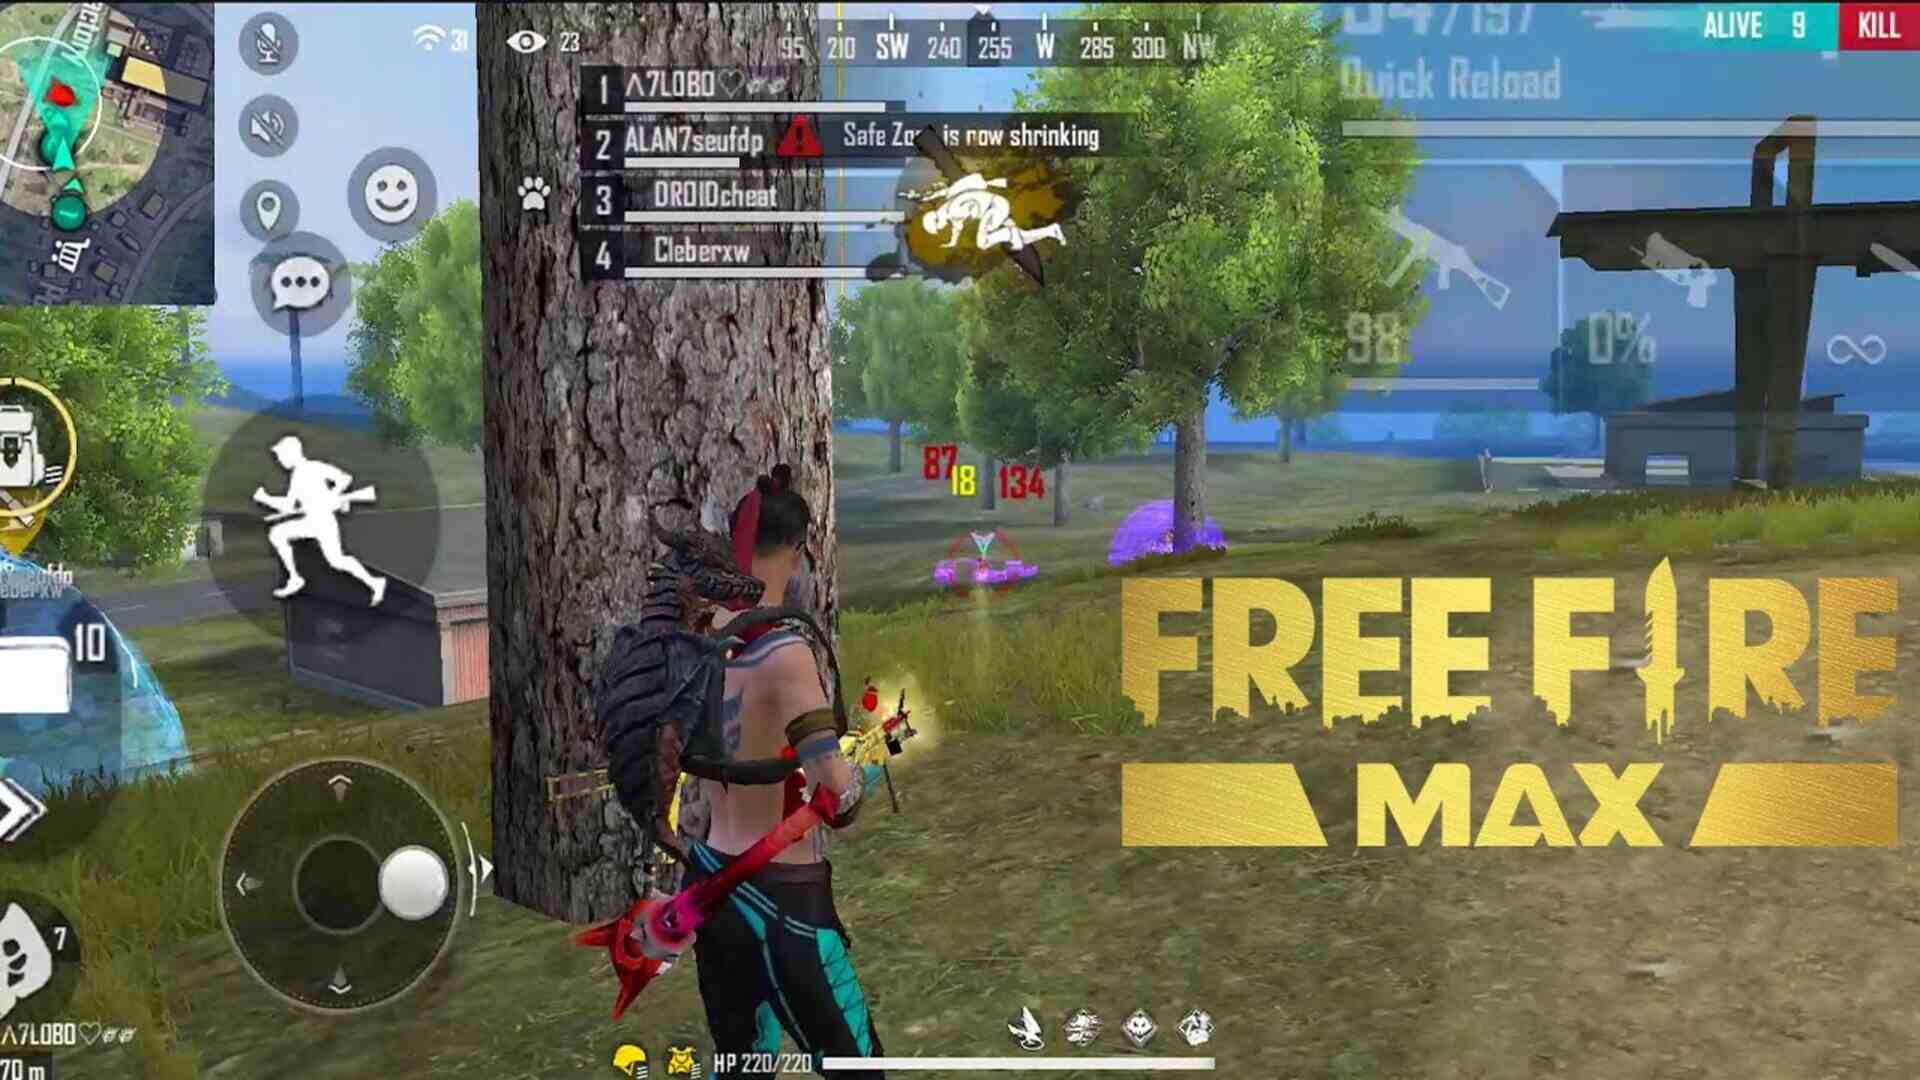 Garena Free Fire MAX Redeem Codes for October 18: Freebies on